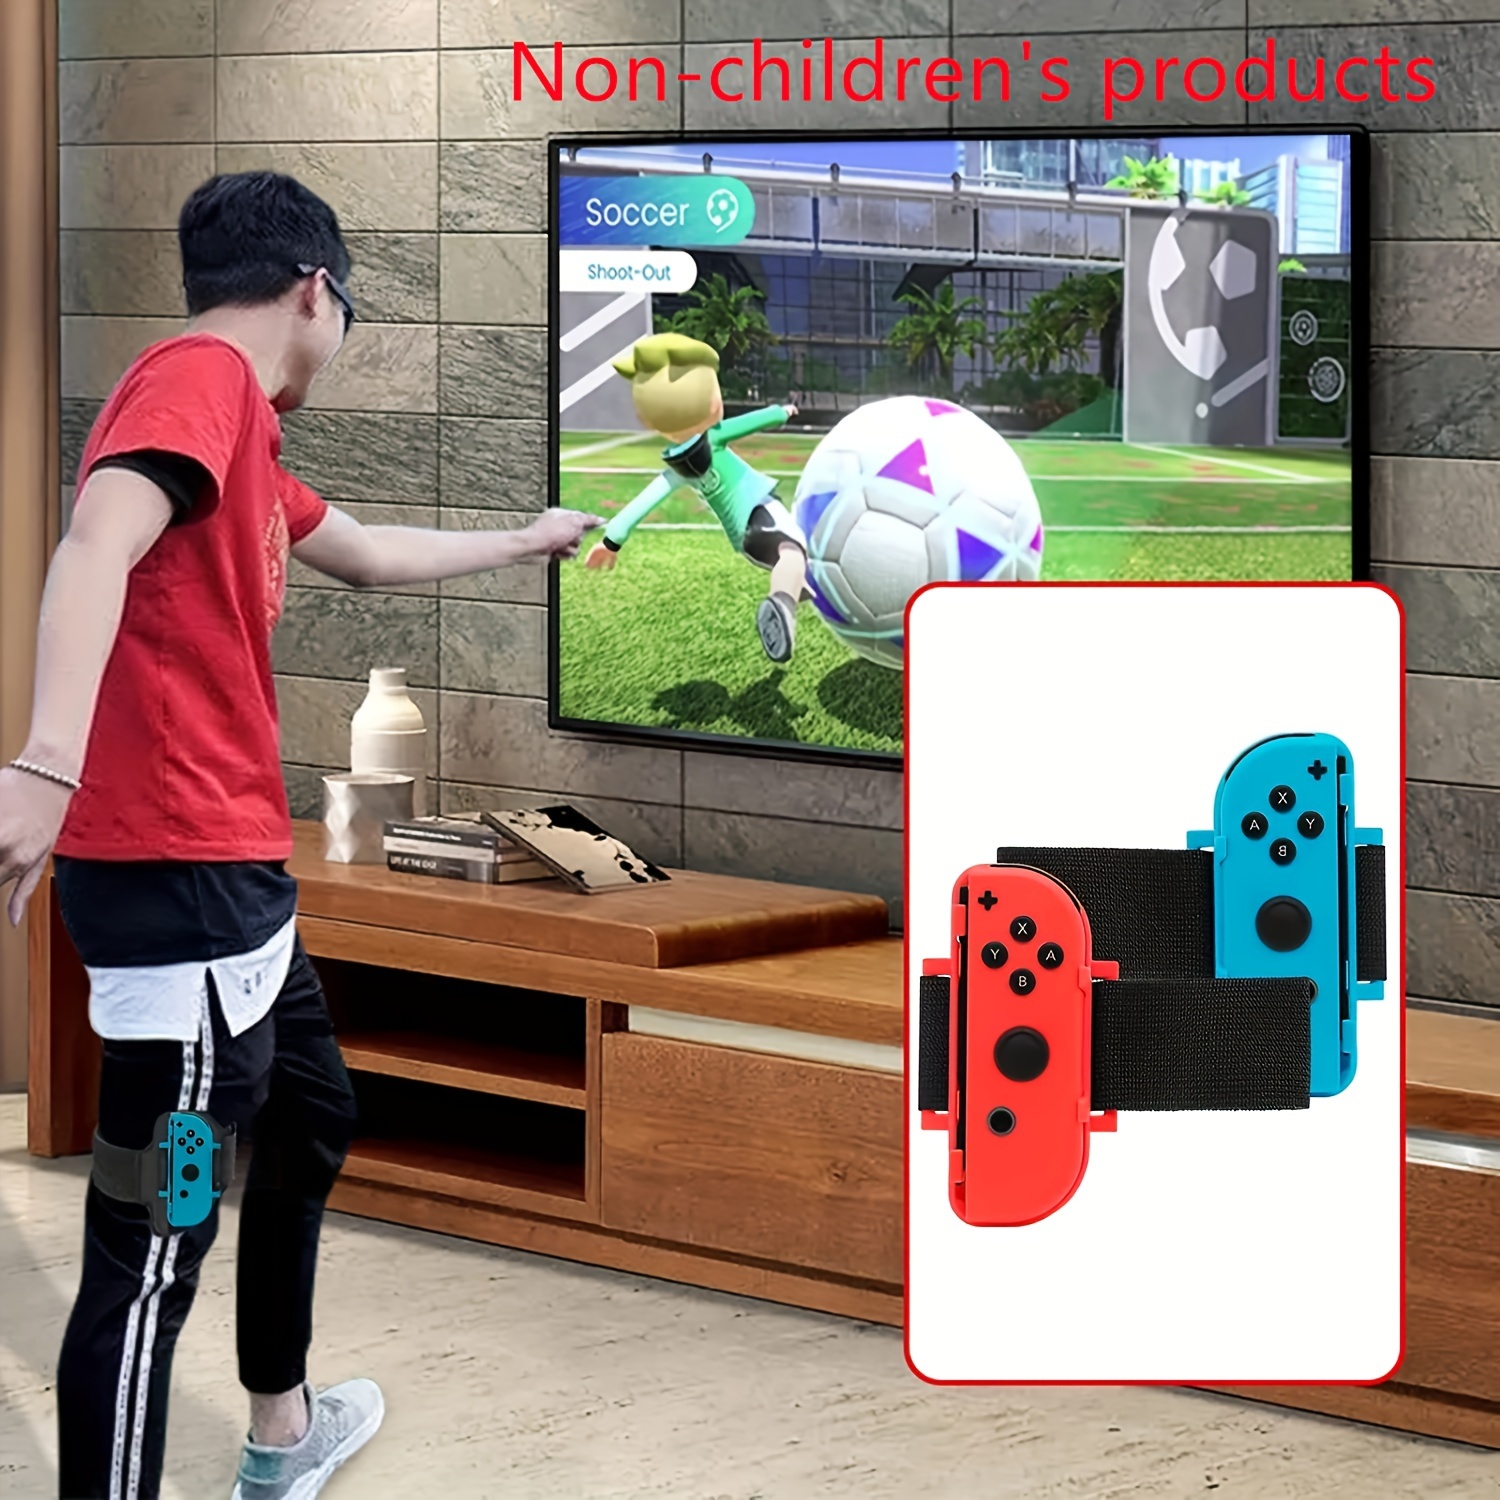 10-in-1 Nintendo Switch Sports Accessories